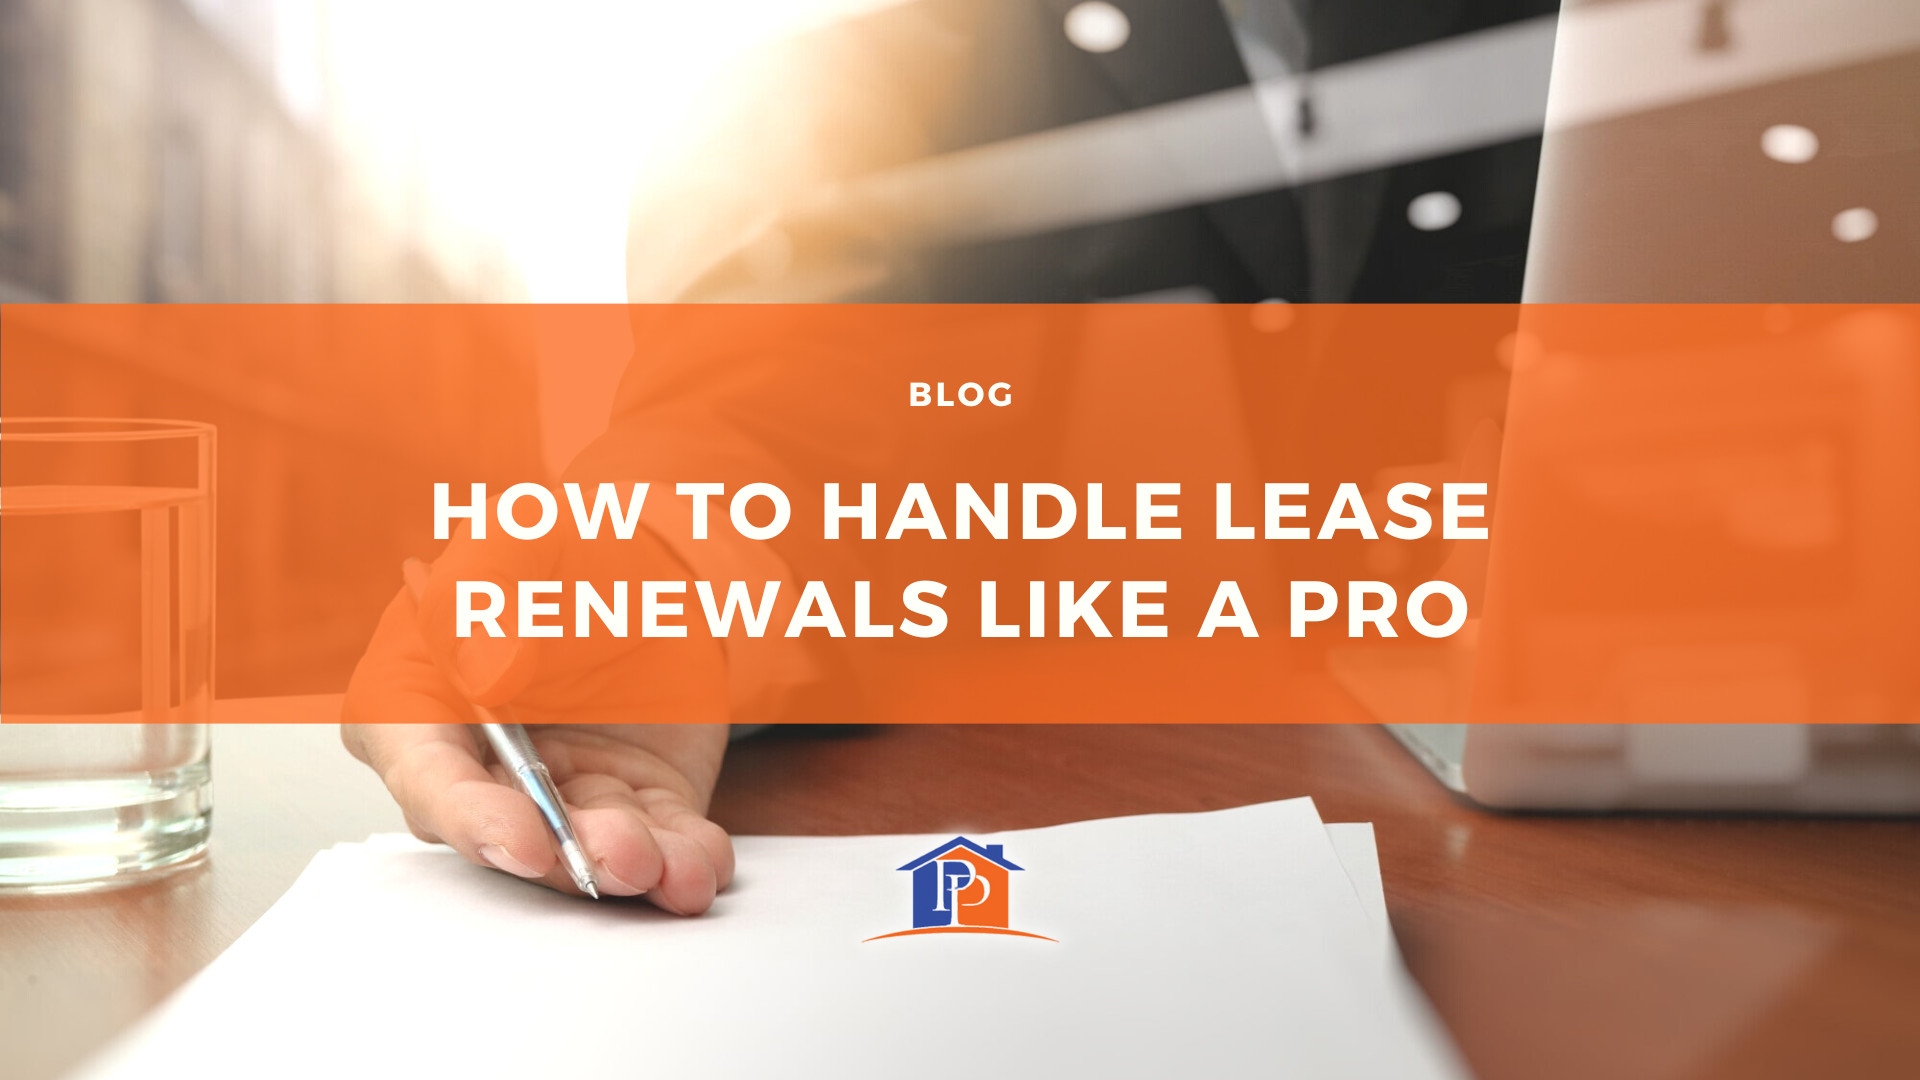 How to Handle Lease Renewals Like a Pro